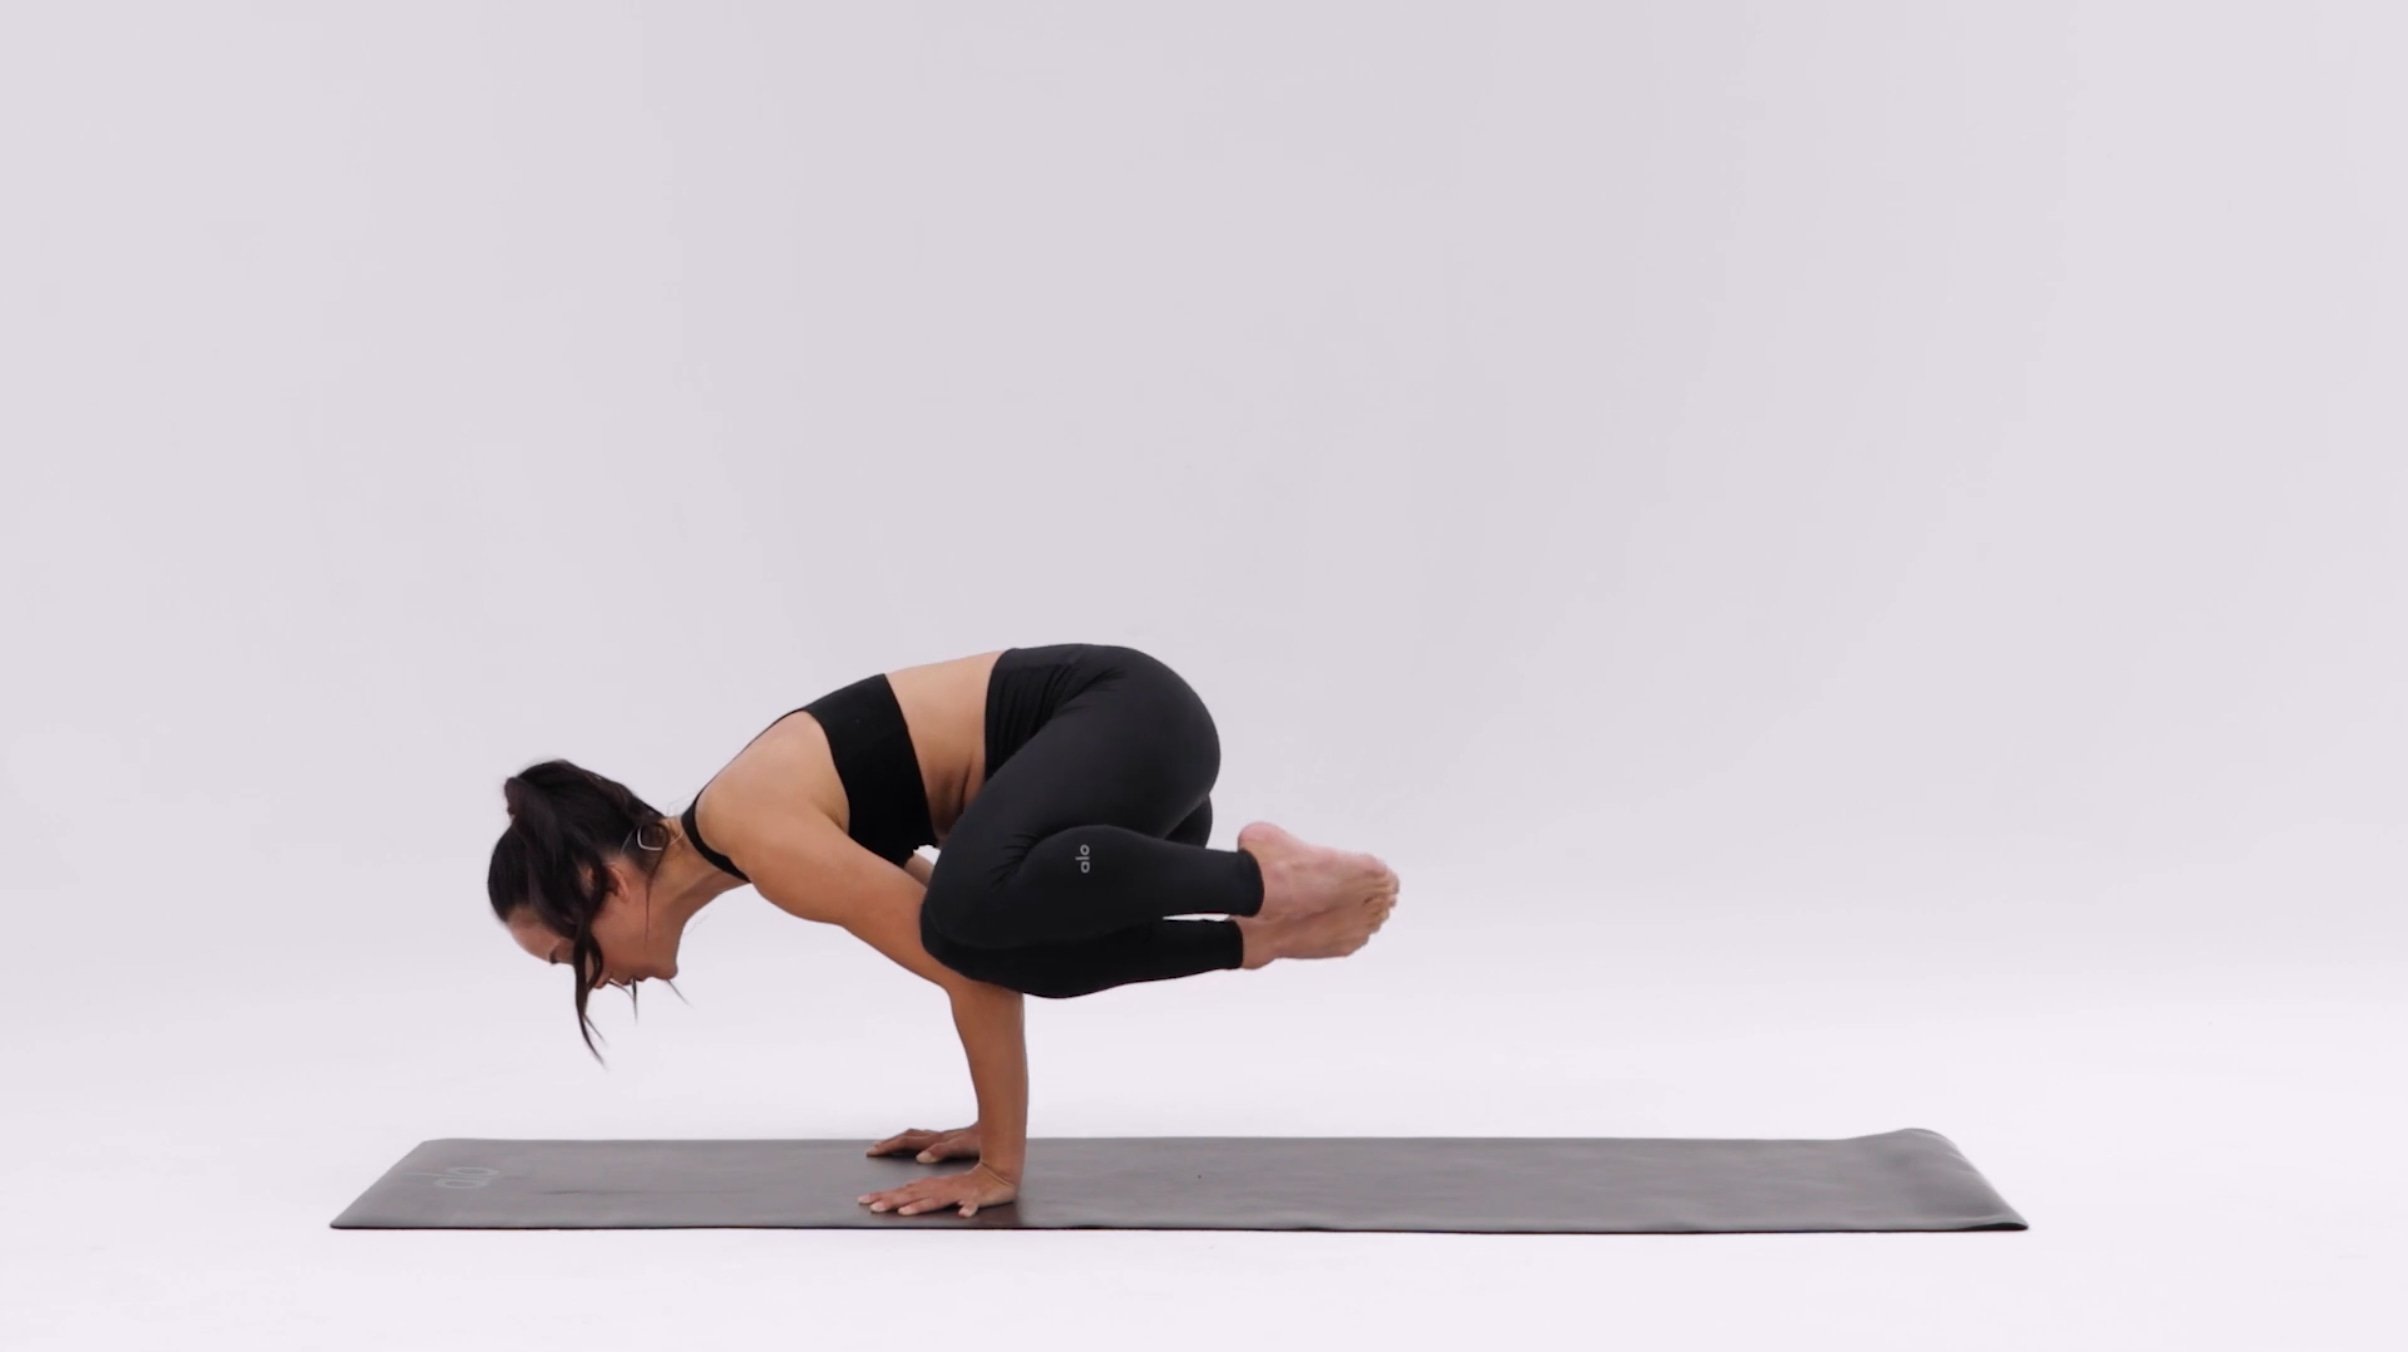 Prepare for Crow Pose with this core-strengthening move: The Moves